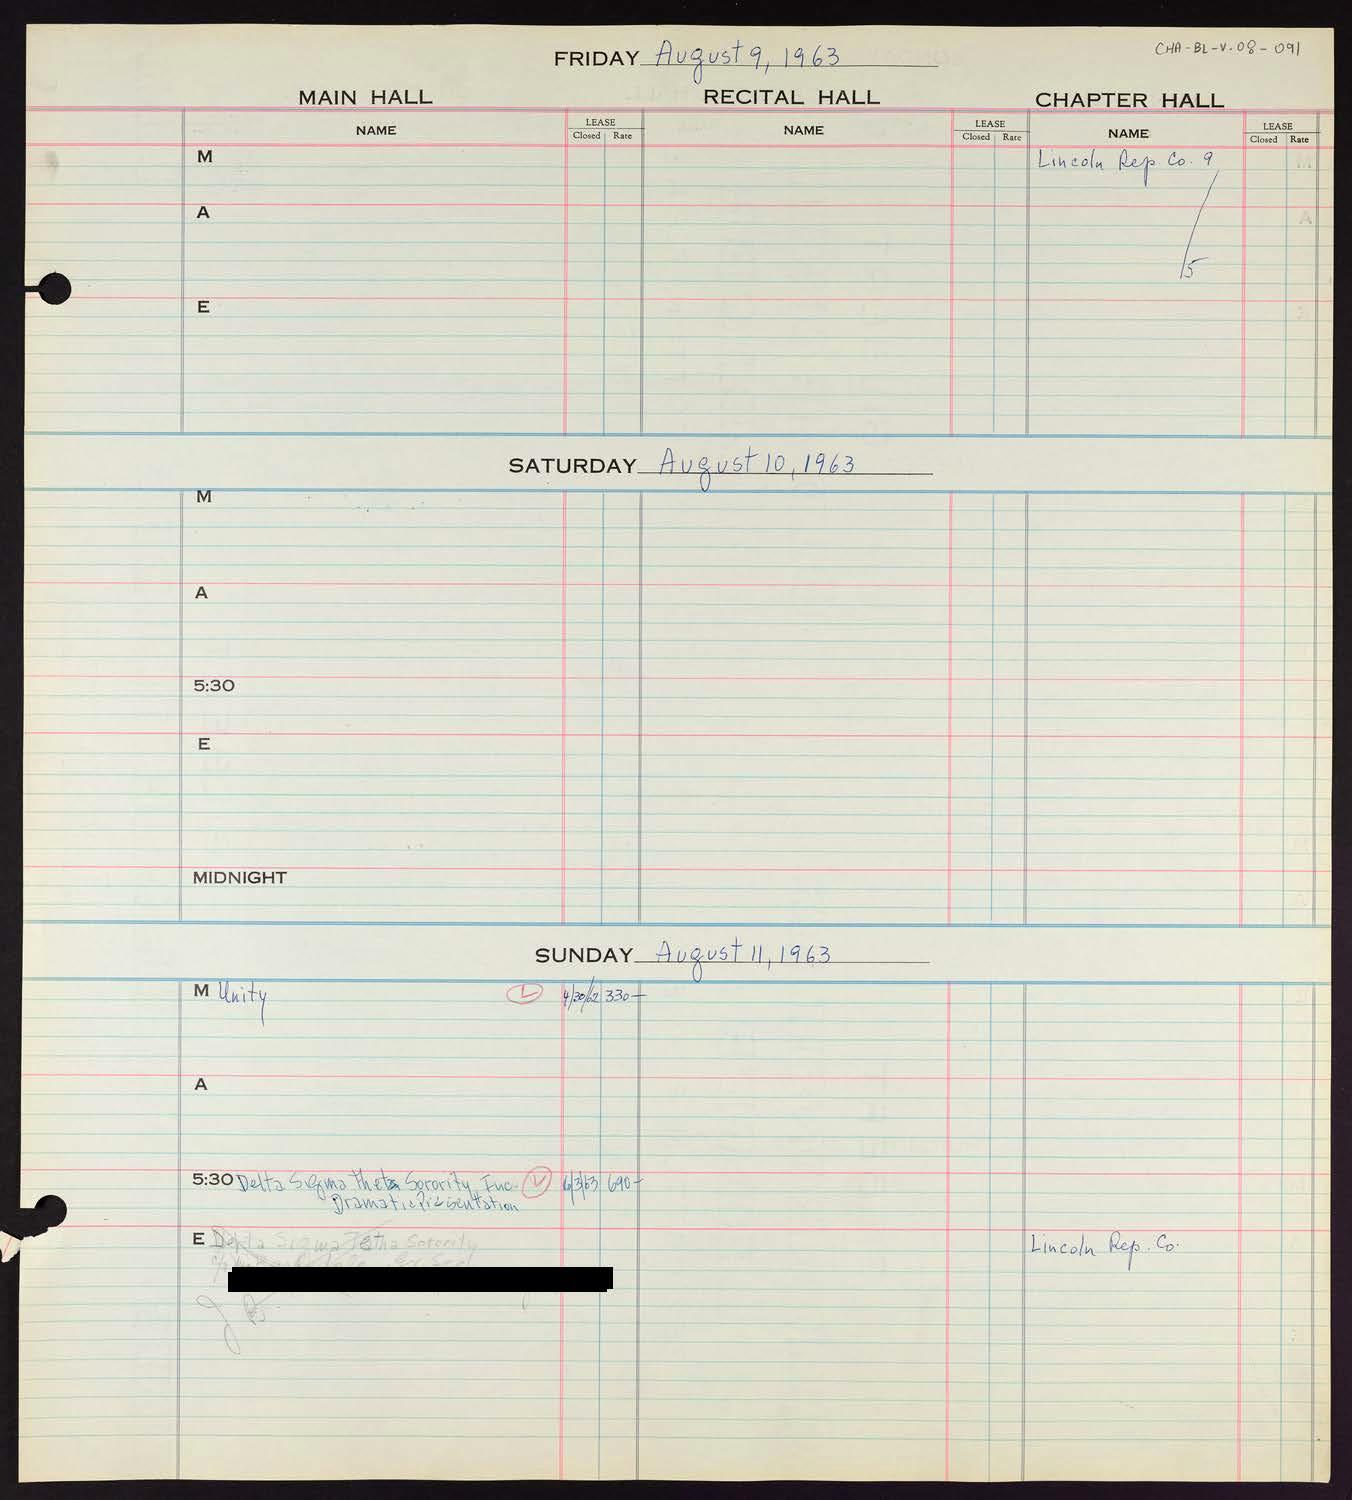 Carnegie Hall Booking Ledger, volume 8, page 91